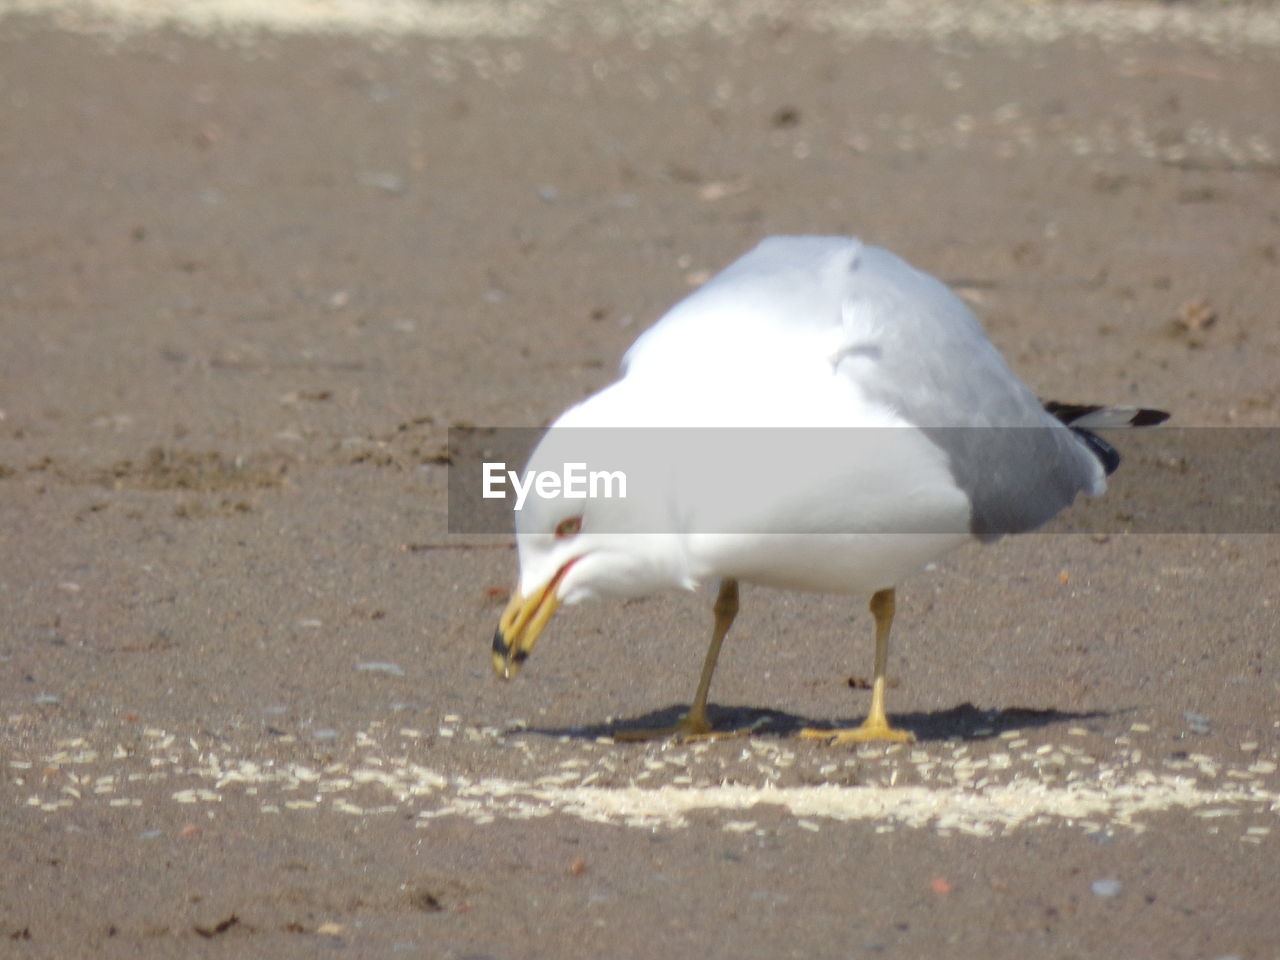 SIDE VIEW OF SEAGULL ON LAND